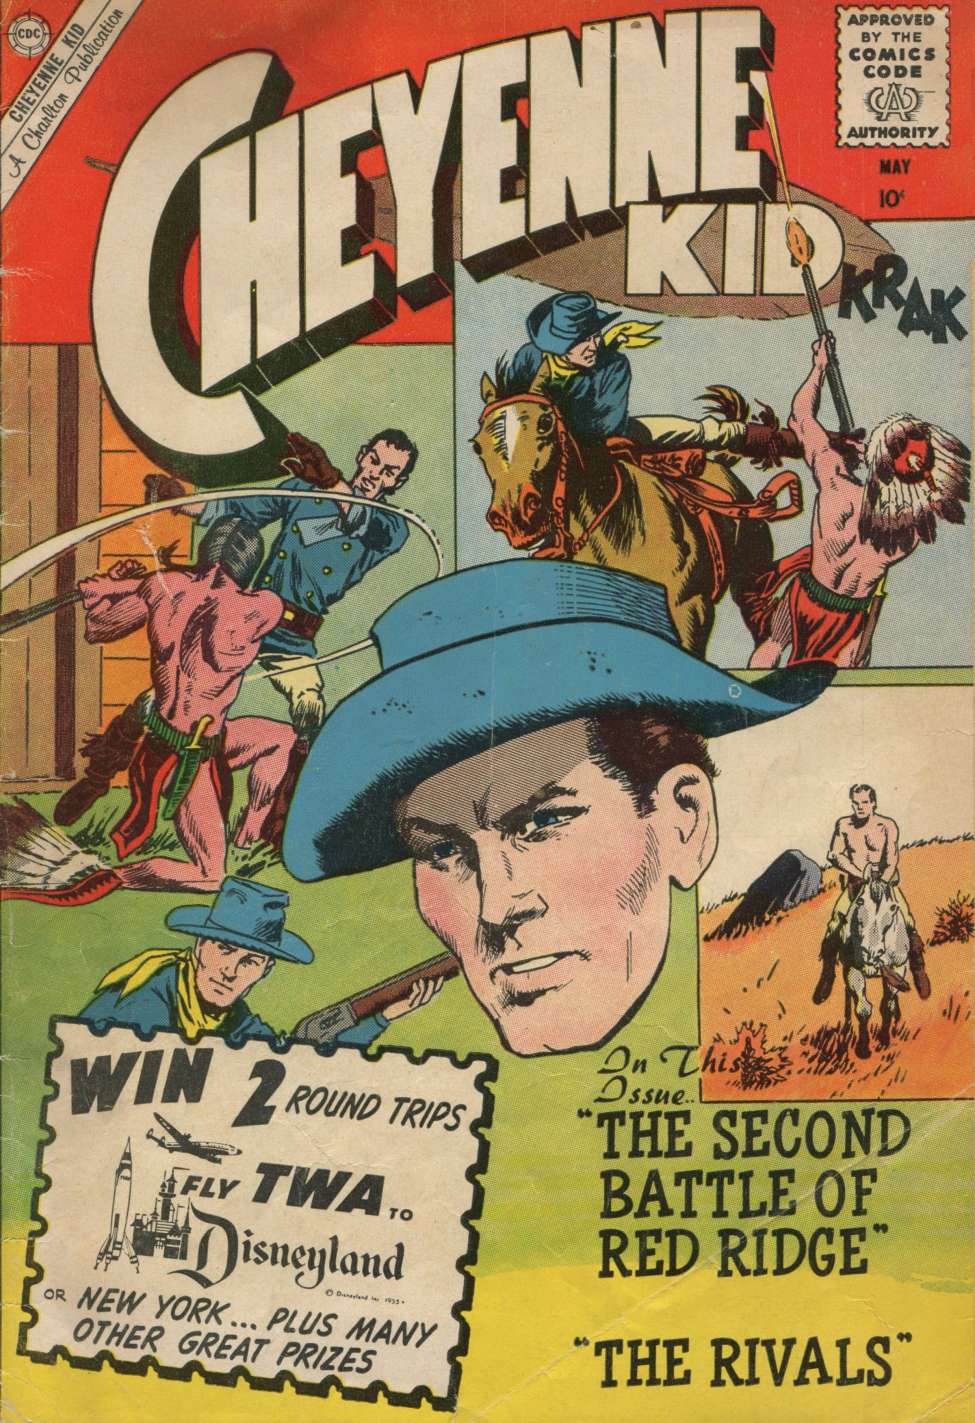 Book Cover For Cheyenne Kid 22